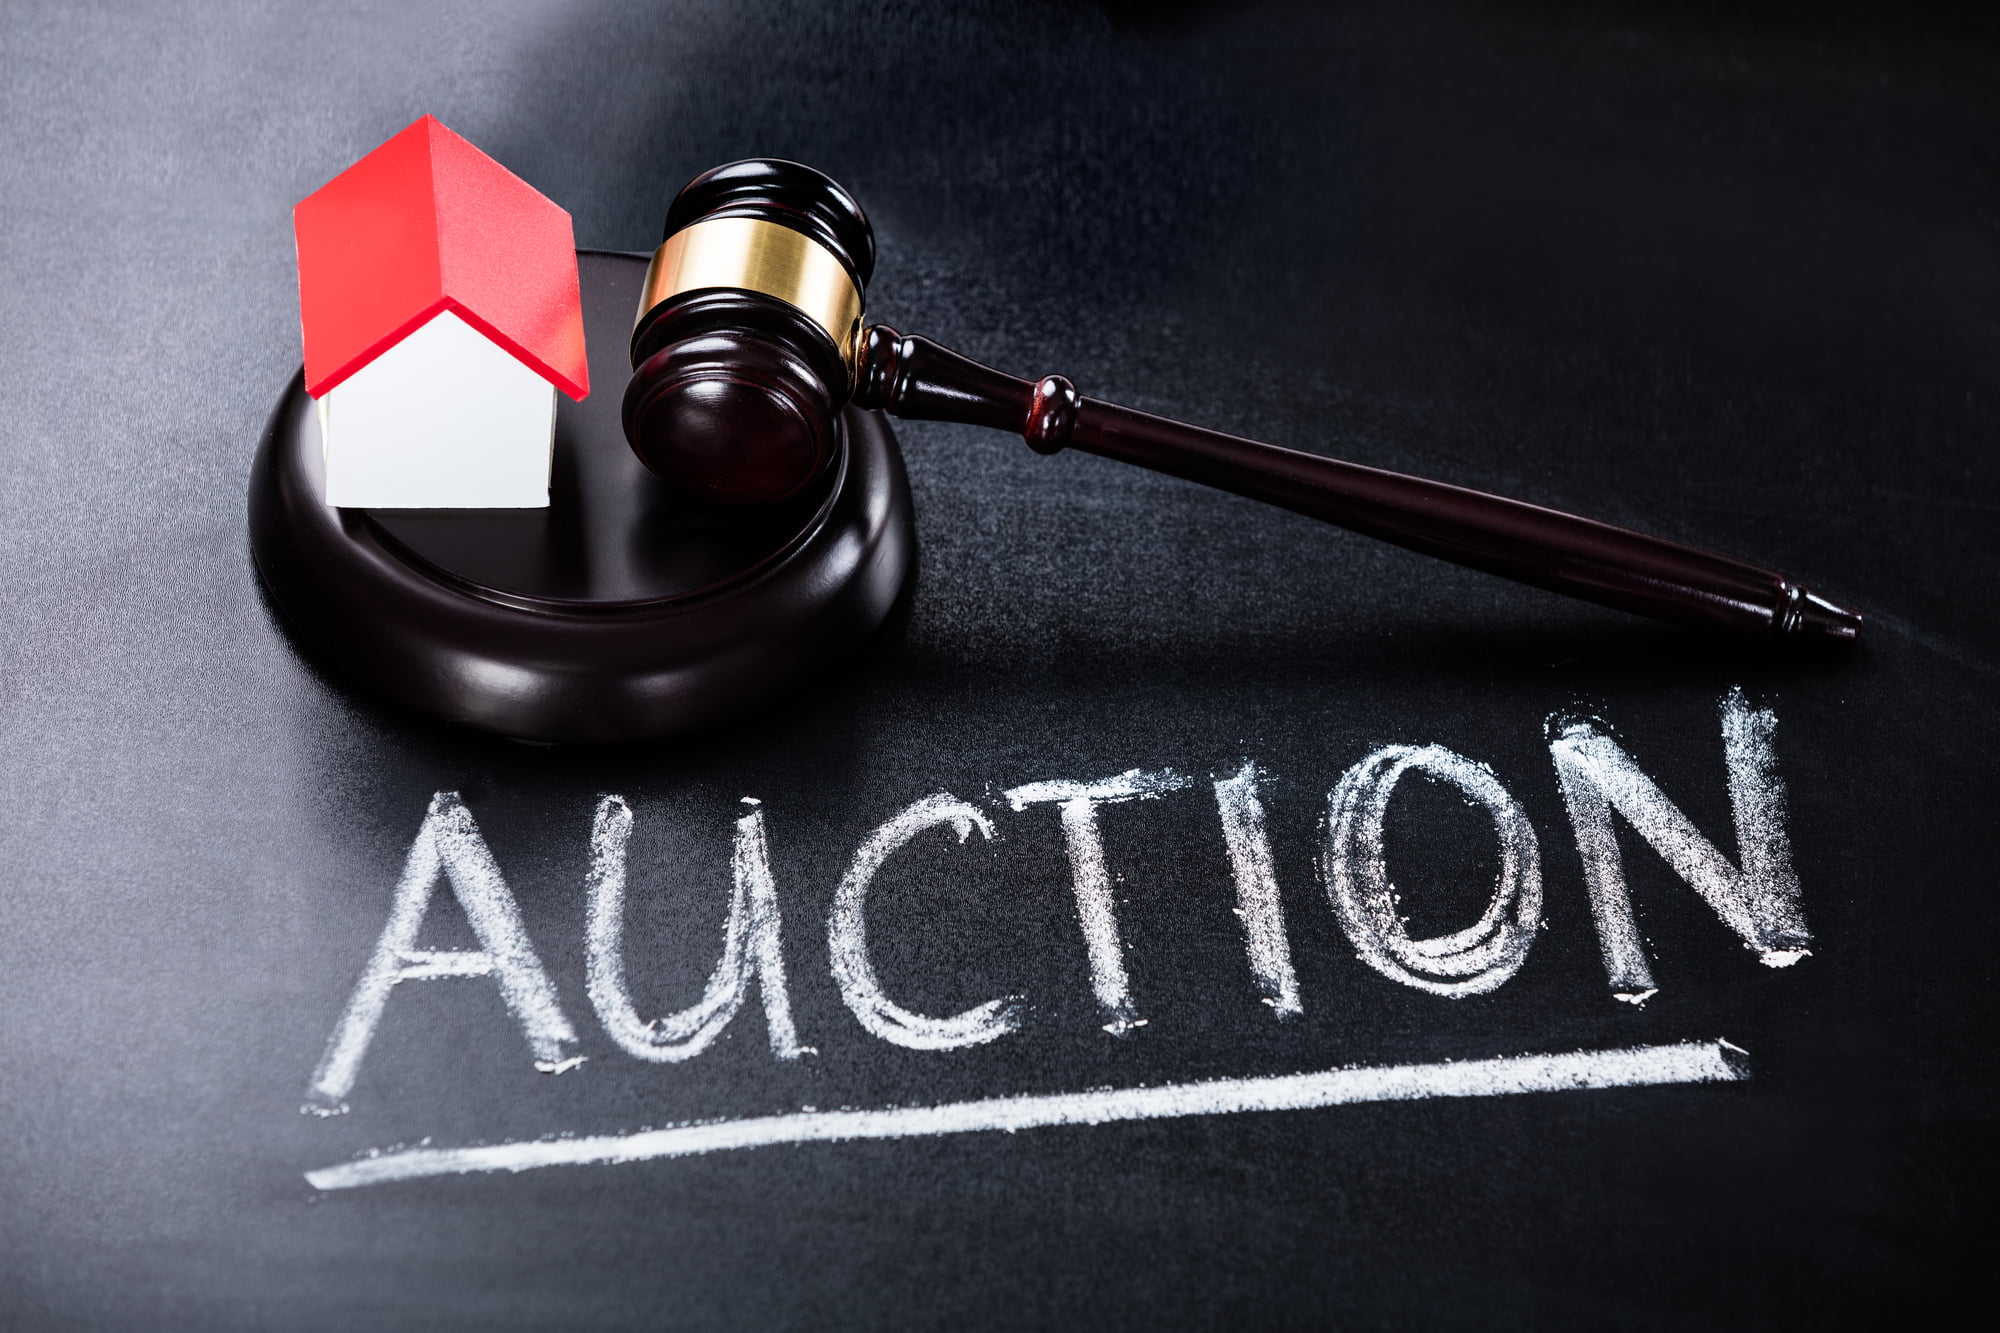 If you are in the property market, it’s possible you could find yourself bidding in an auction. Here’s why it’s important for you to consider an independent building and pest inspection before you register yourself to bid.